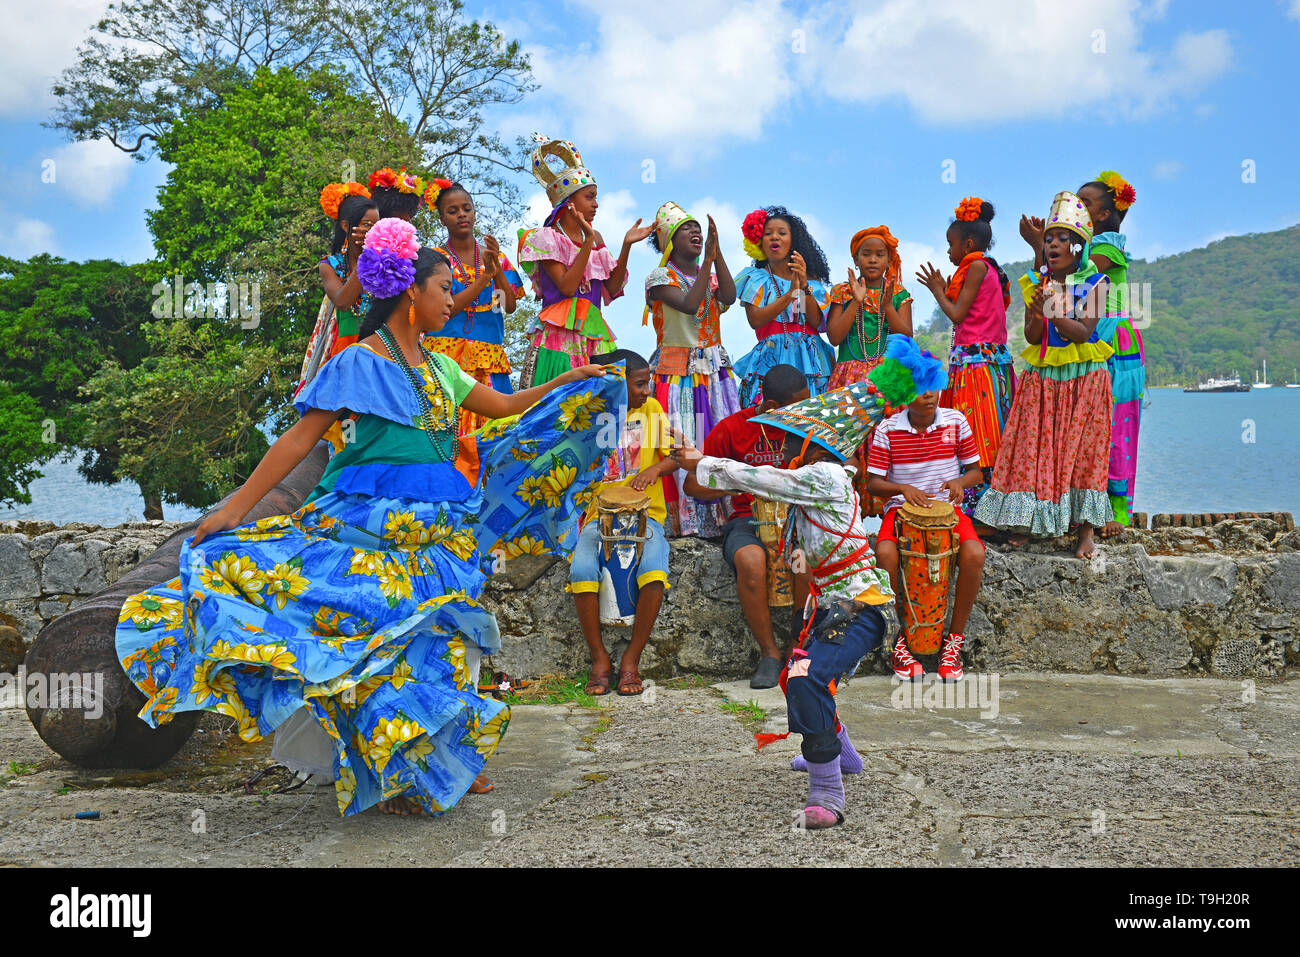 Young Panama people performing the traditional Congo dance in traditional clothing with music instruments in a spanish fortress, Portobelo, Panama. Stock Photo